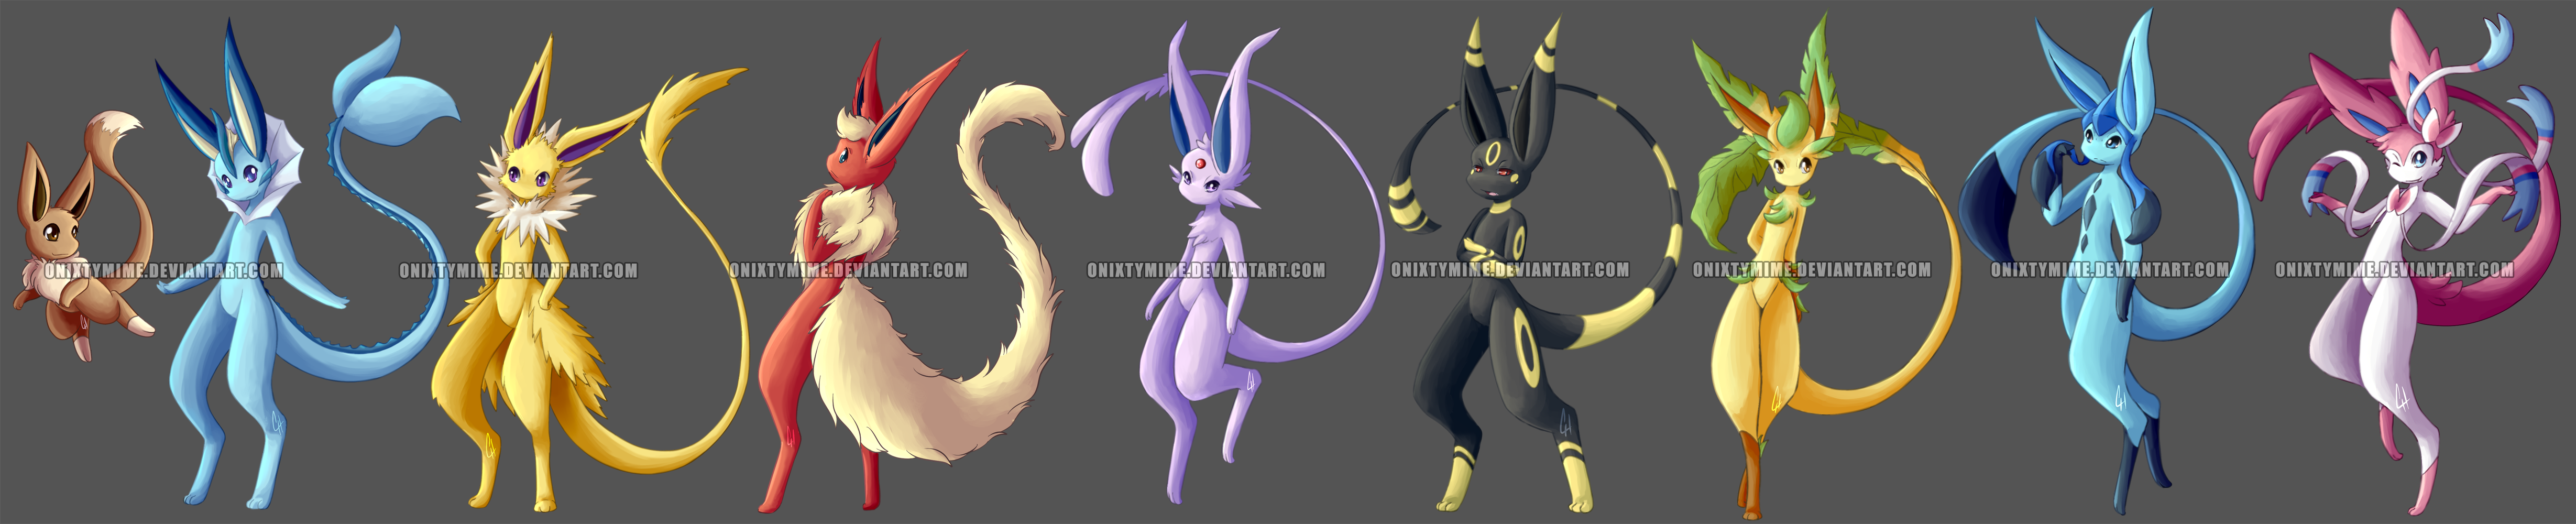 Shiny Eeveelutions Project - Complete by Rotommowtom on DeviantArt